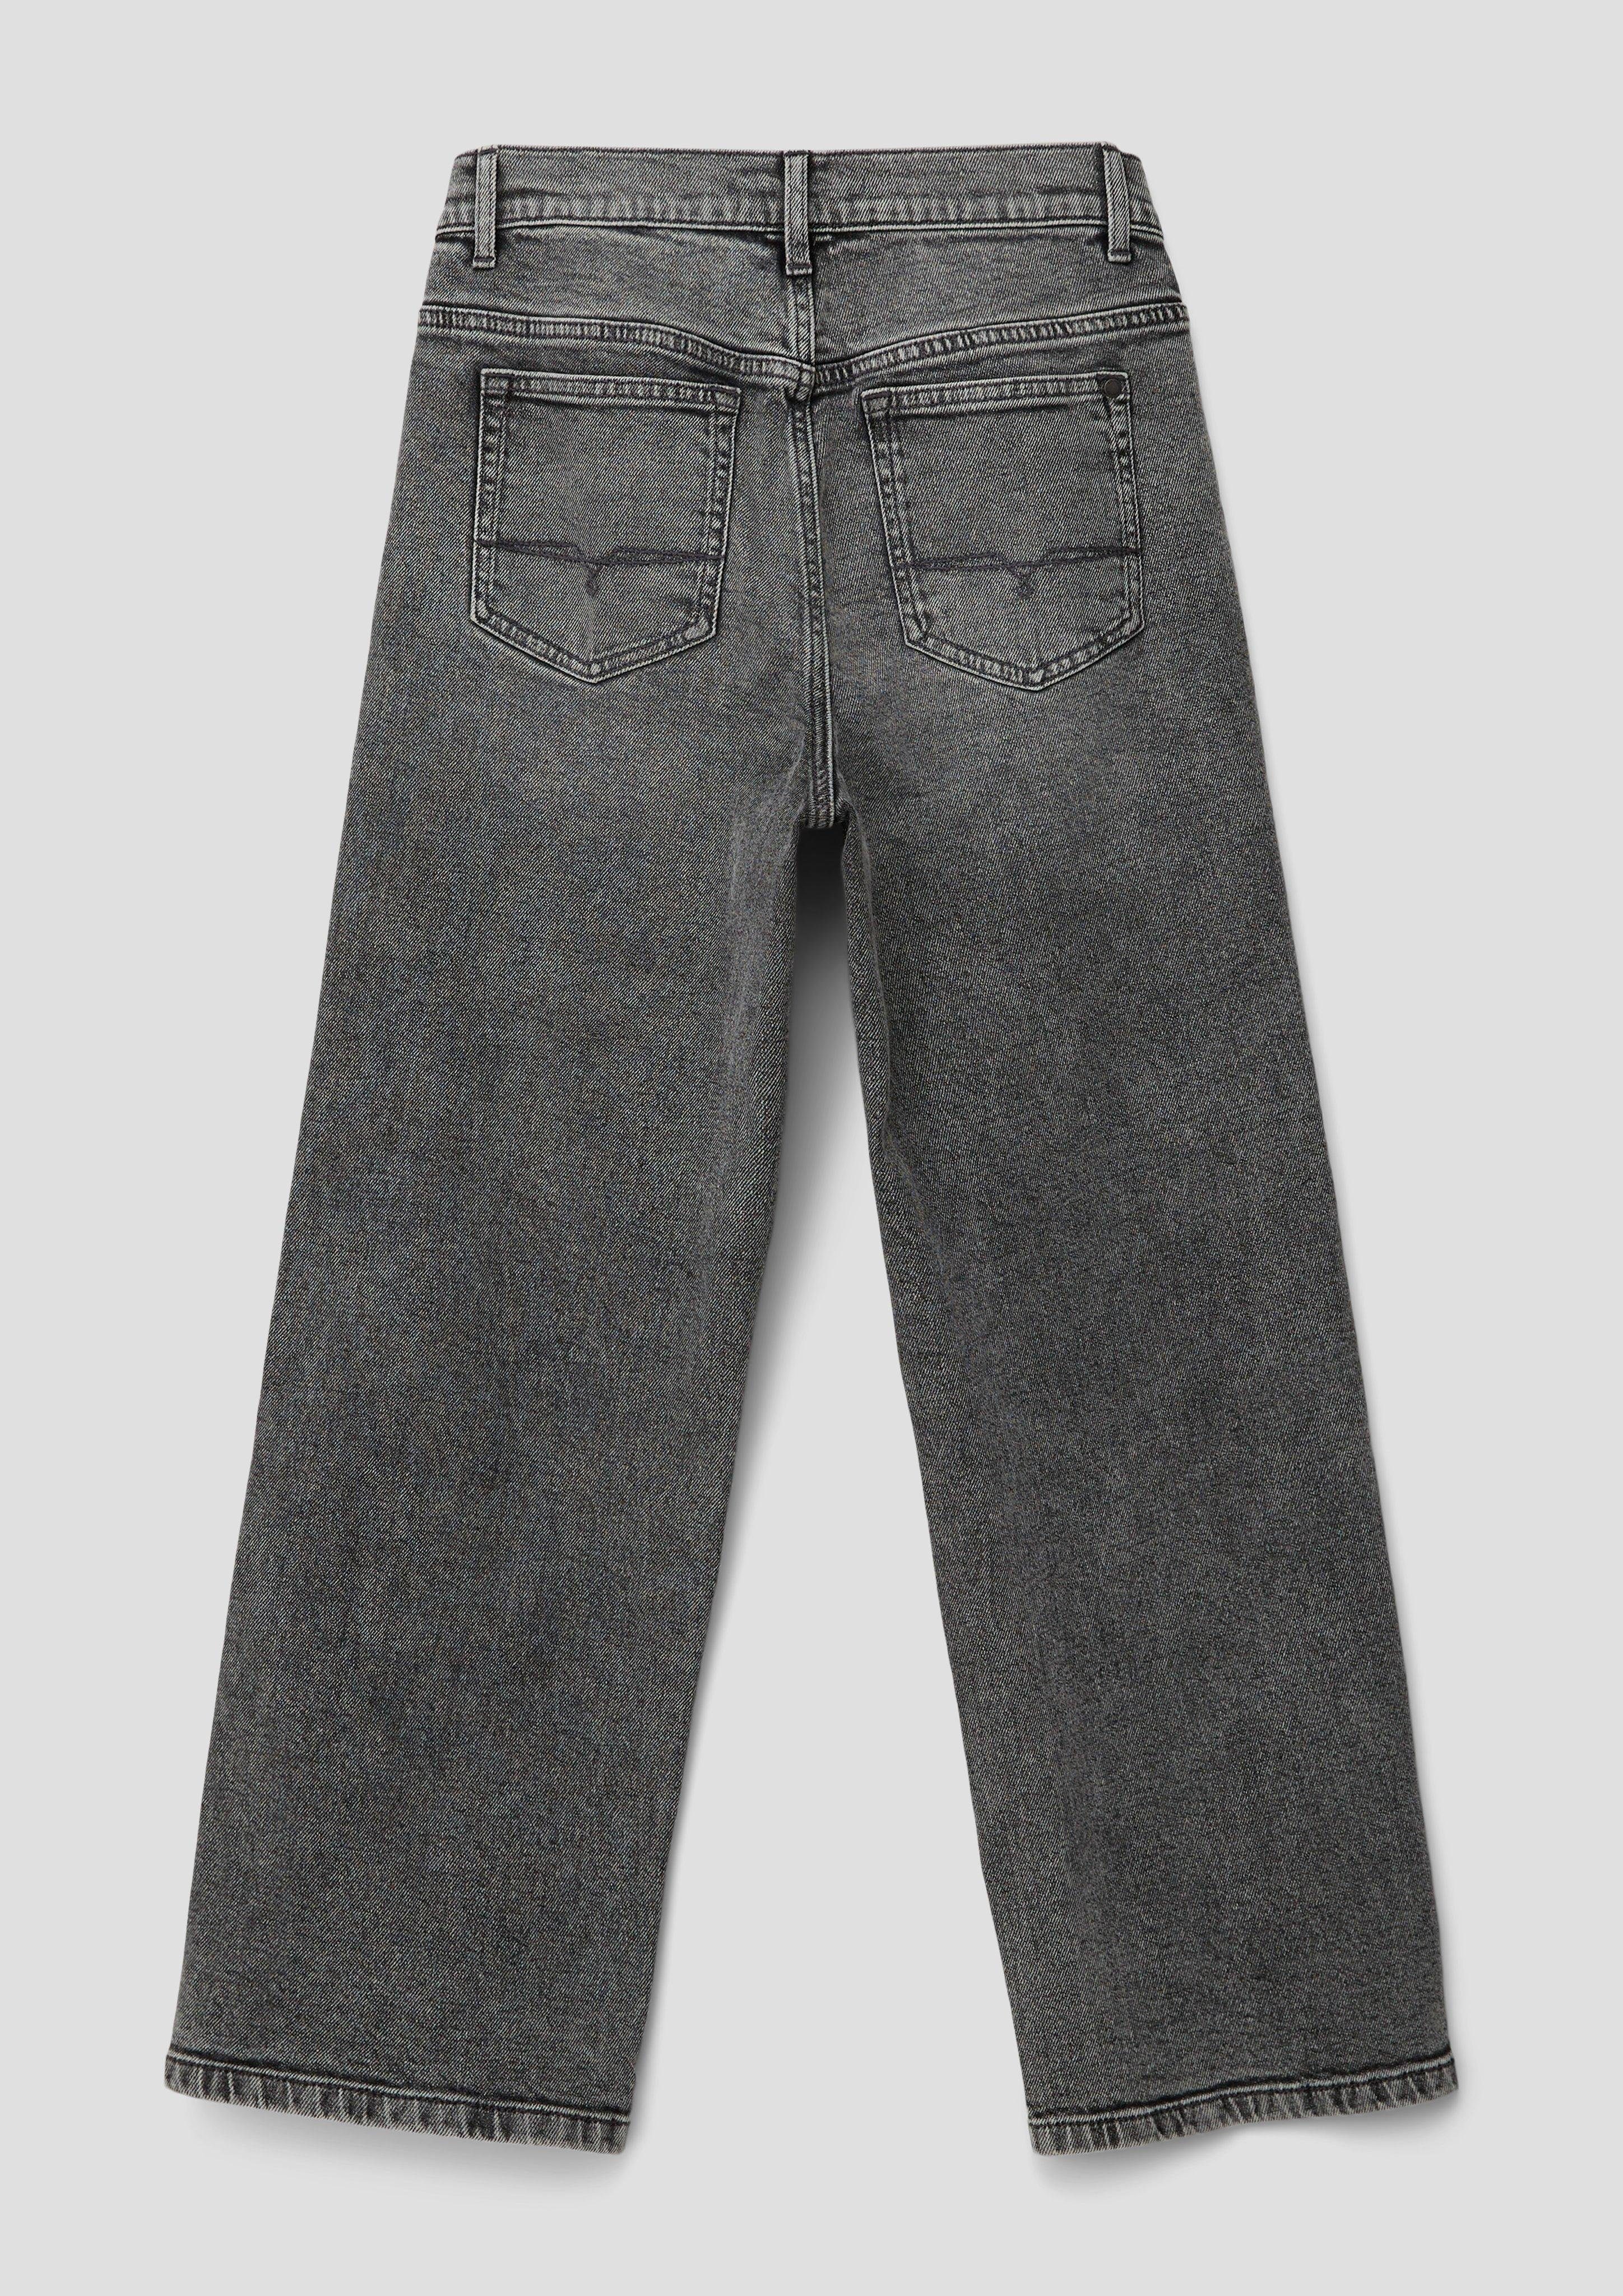 Jeans Relaxed Fit Rise / Leg Mid / s.Oliver 5-Pocket-Jeans / Wide Waschung